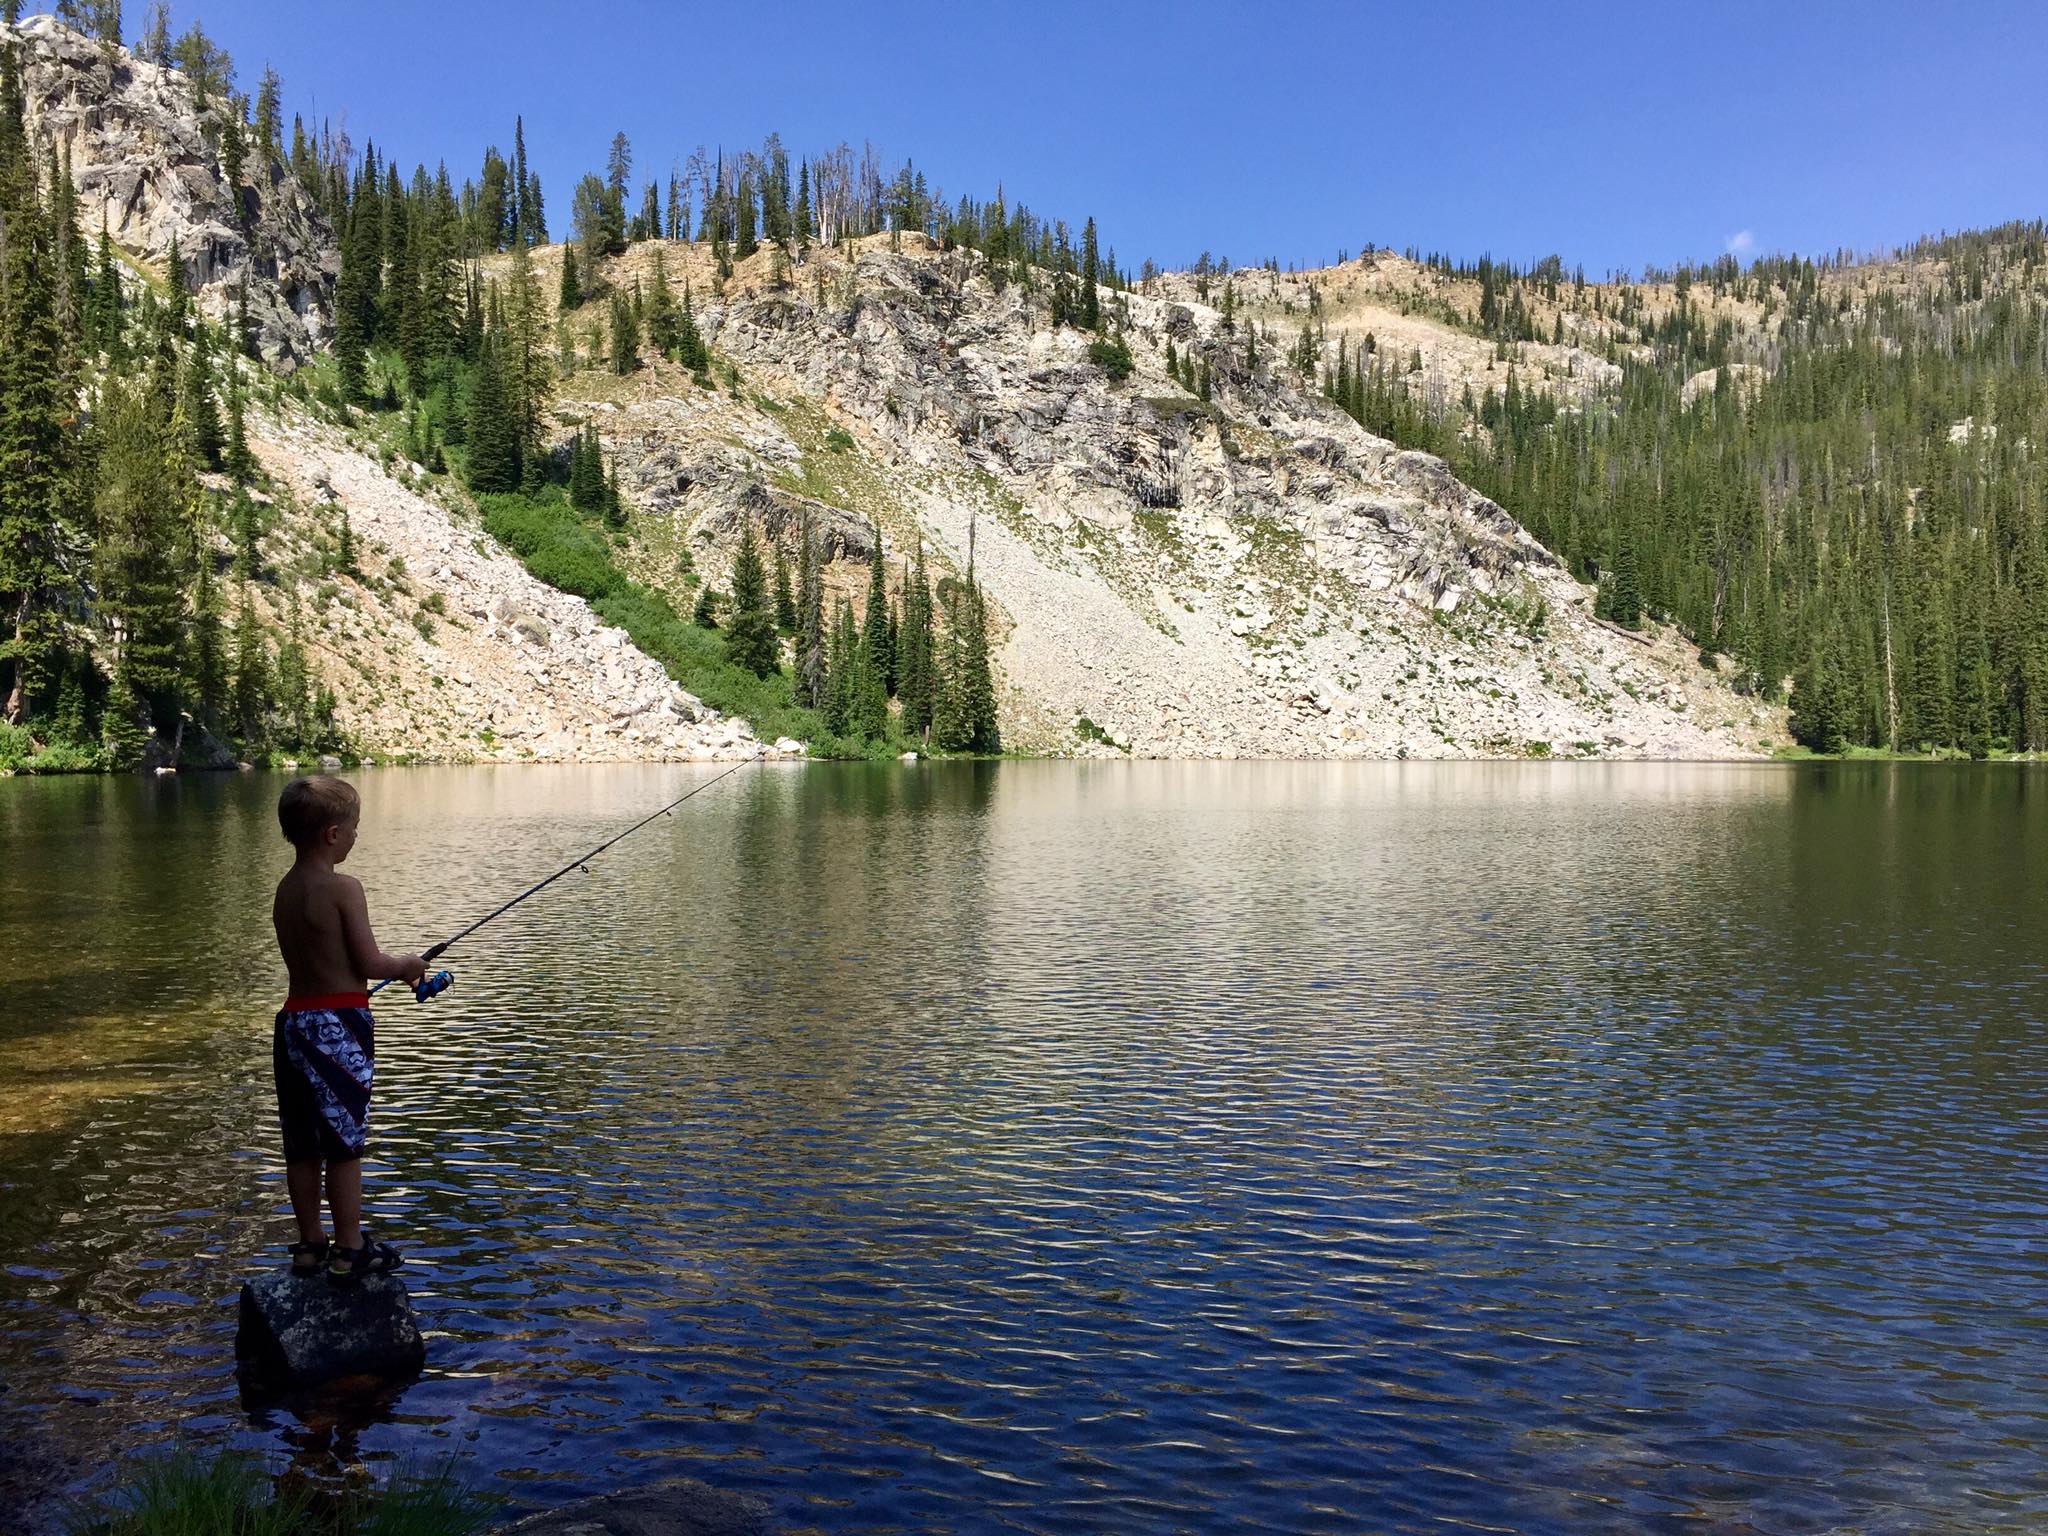 A boy wearing a swim suit fishes at an alpine lake.